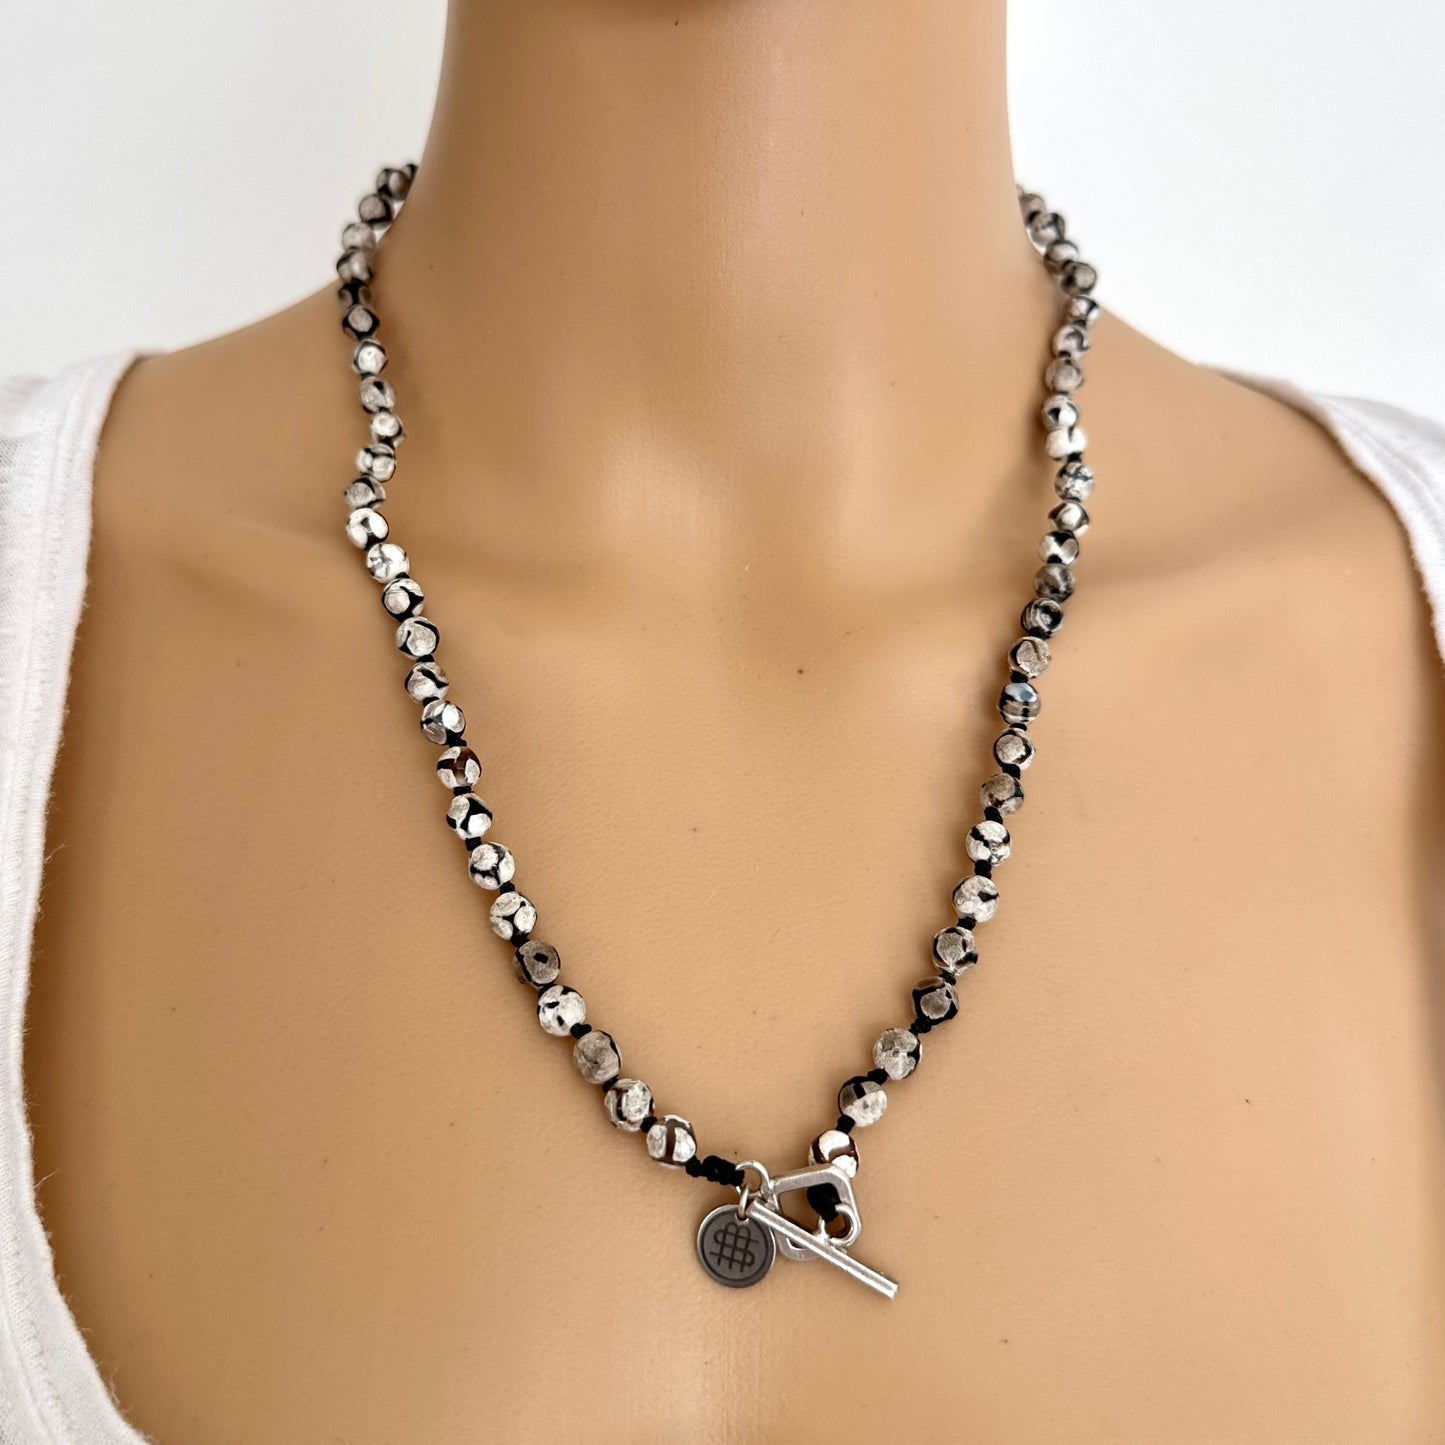 Black and white gemstone and sterling silver womens necklace